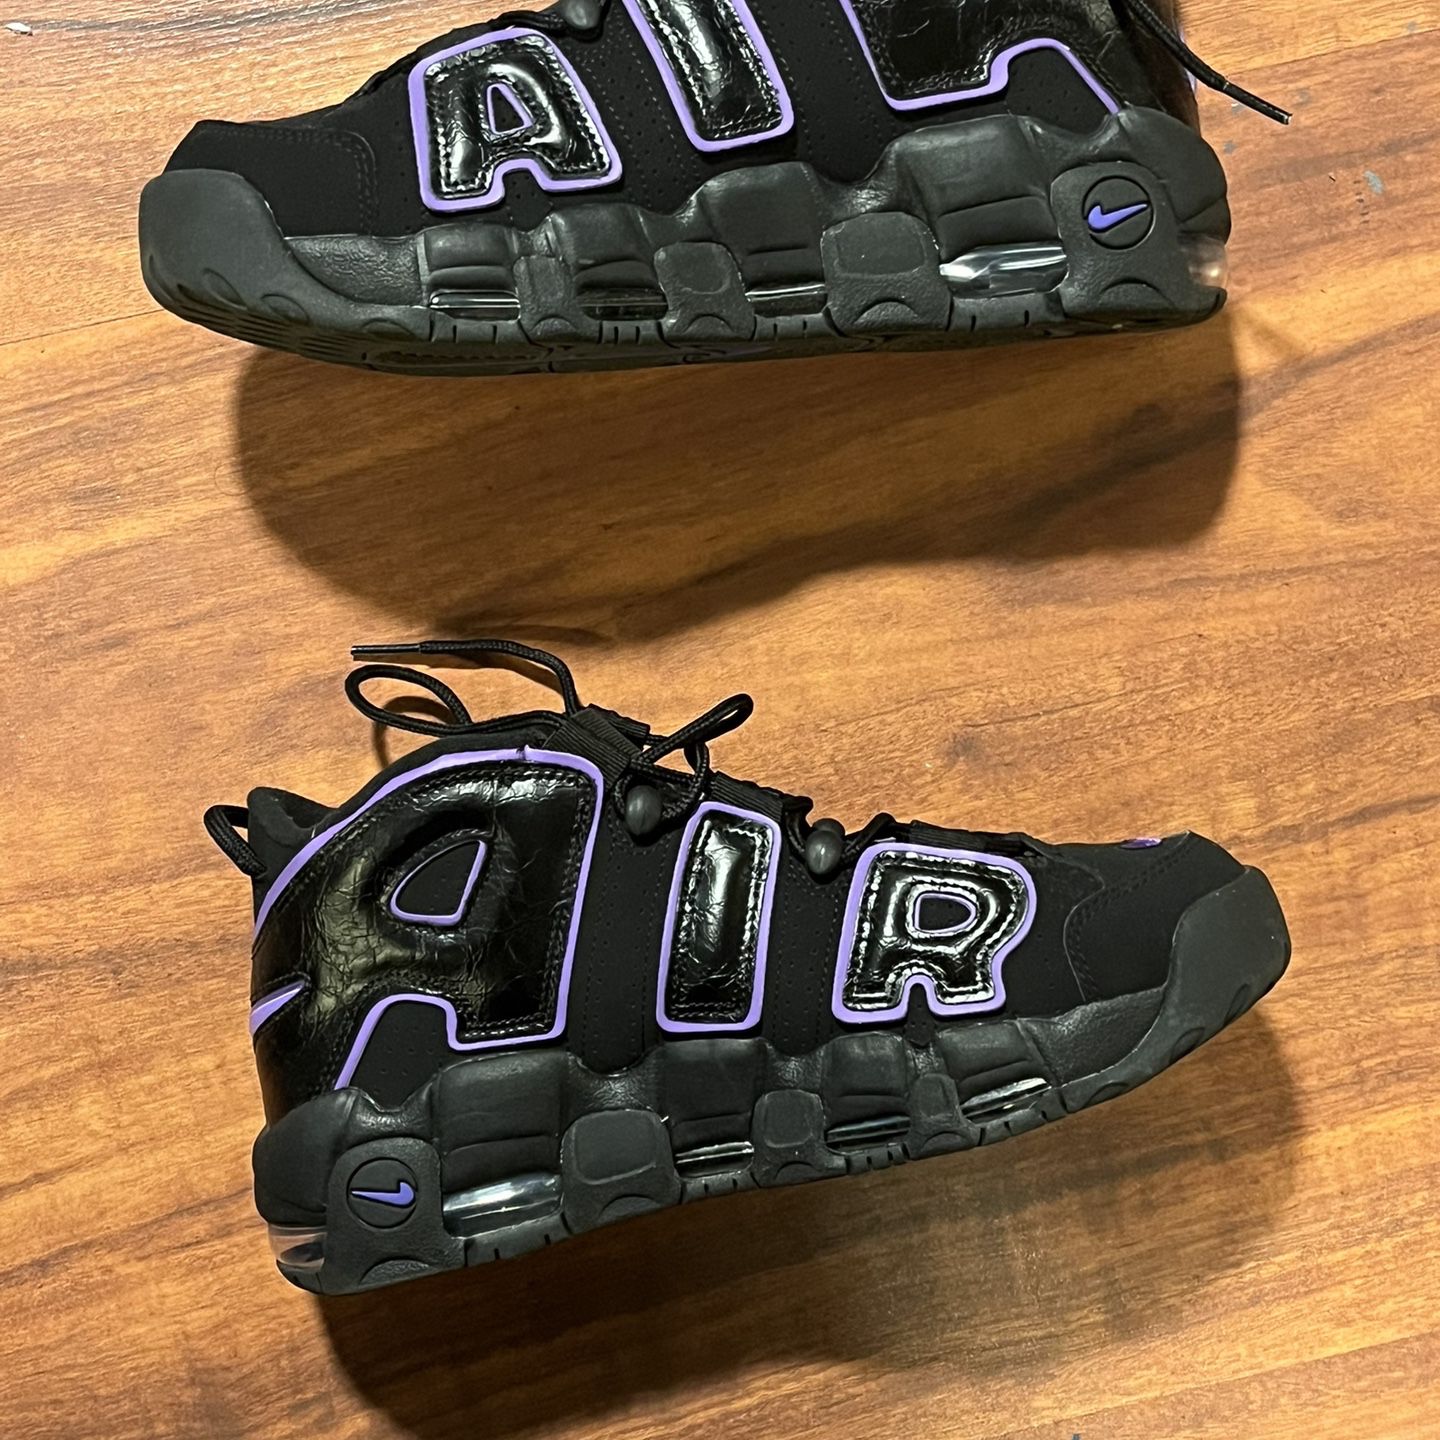 Nike Air More Uptempo 96 Size 13 for Sale in The Bronx, NY - OfferUp